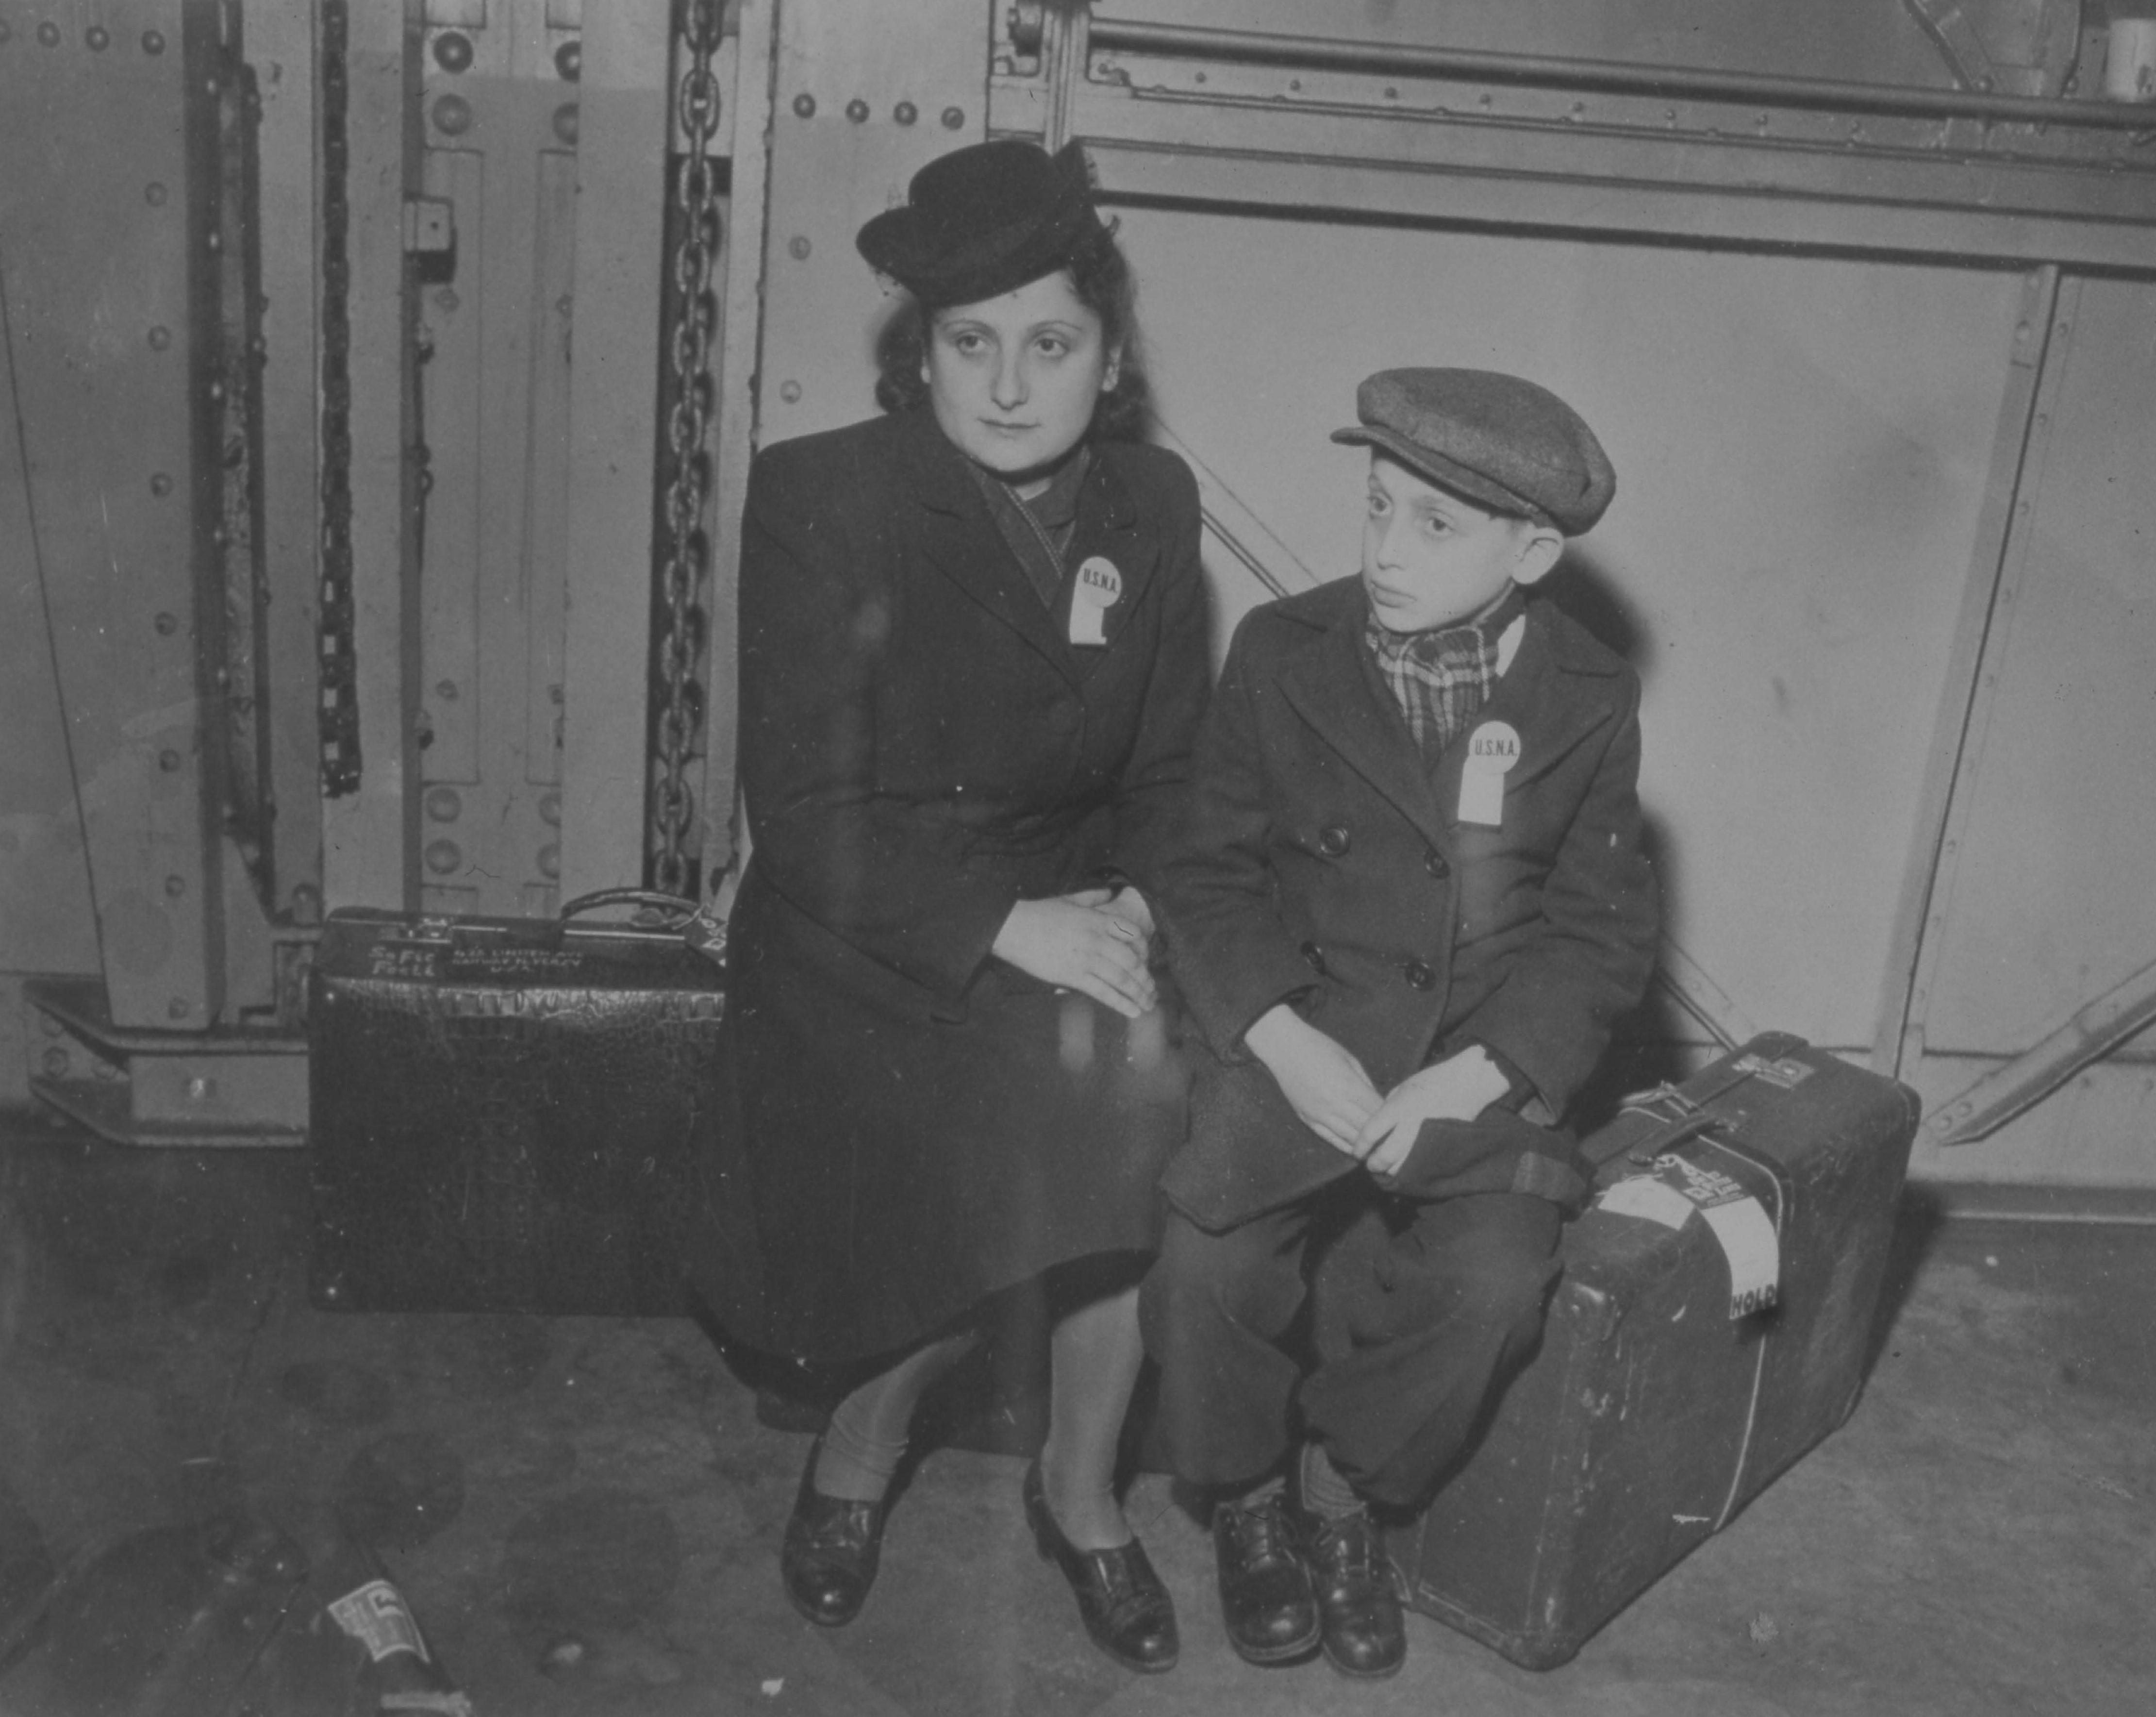 Renee and her brother Michael on a boat to the United States in 1947